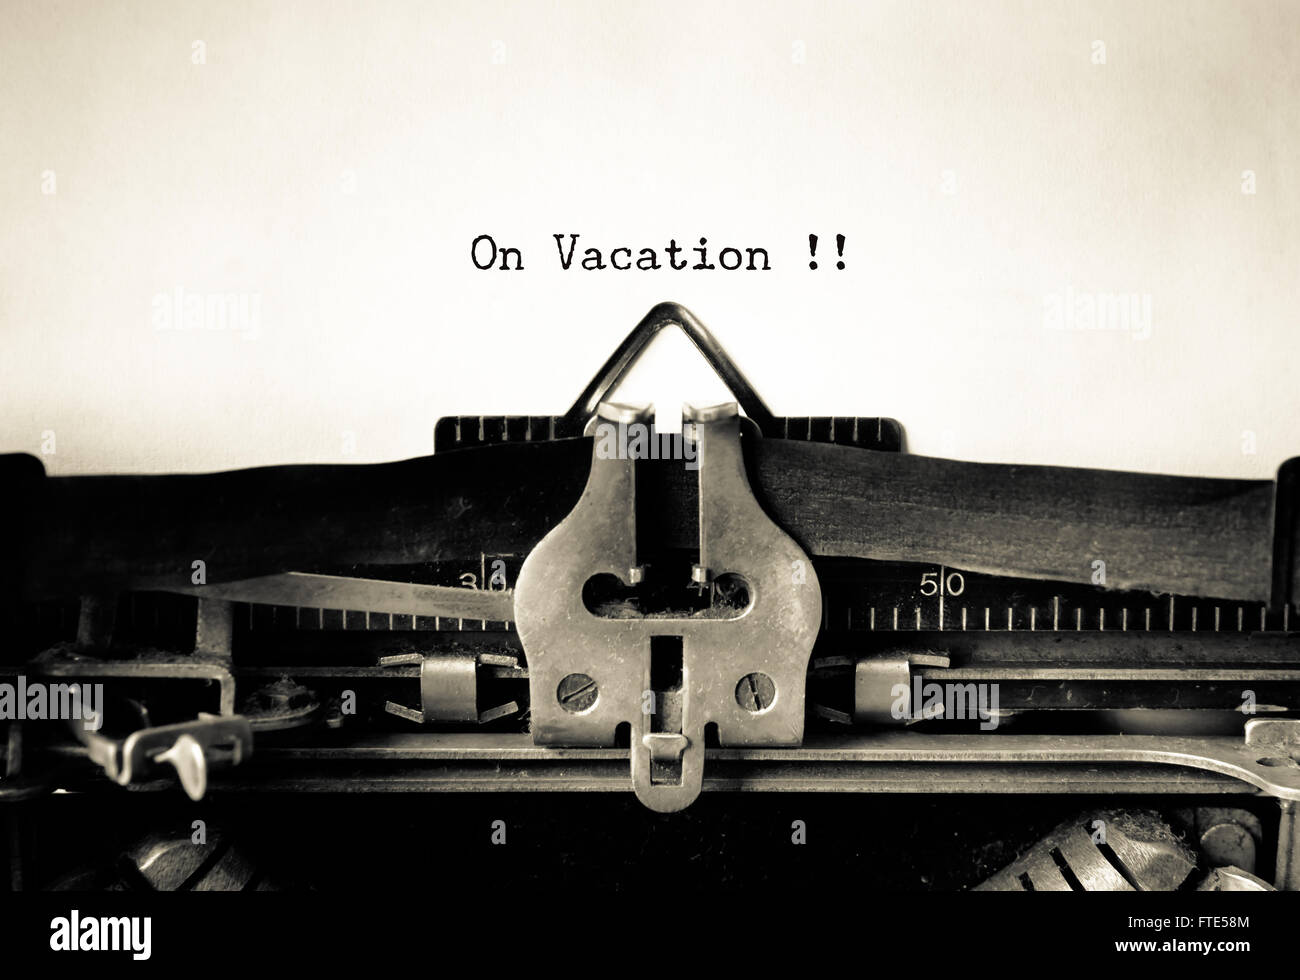 On Vacation words typed on a Vintage Typewriter Stock Photo